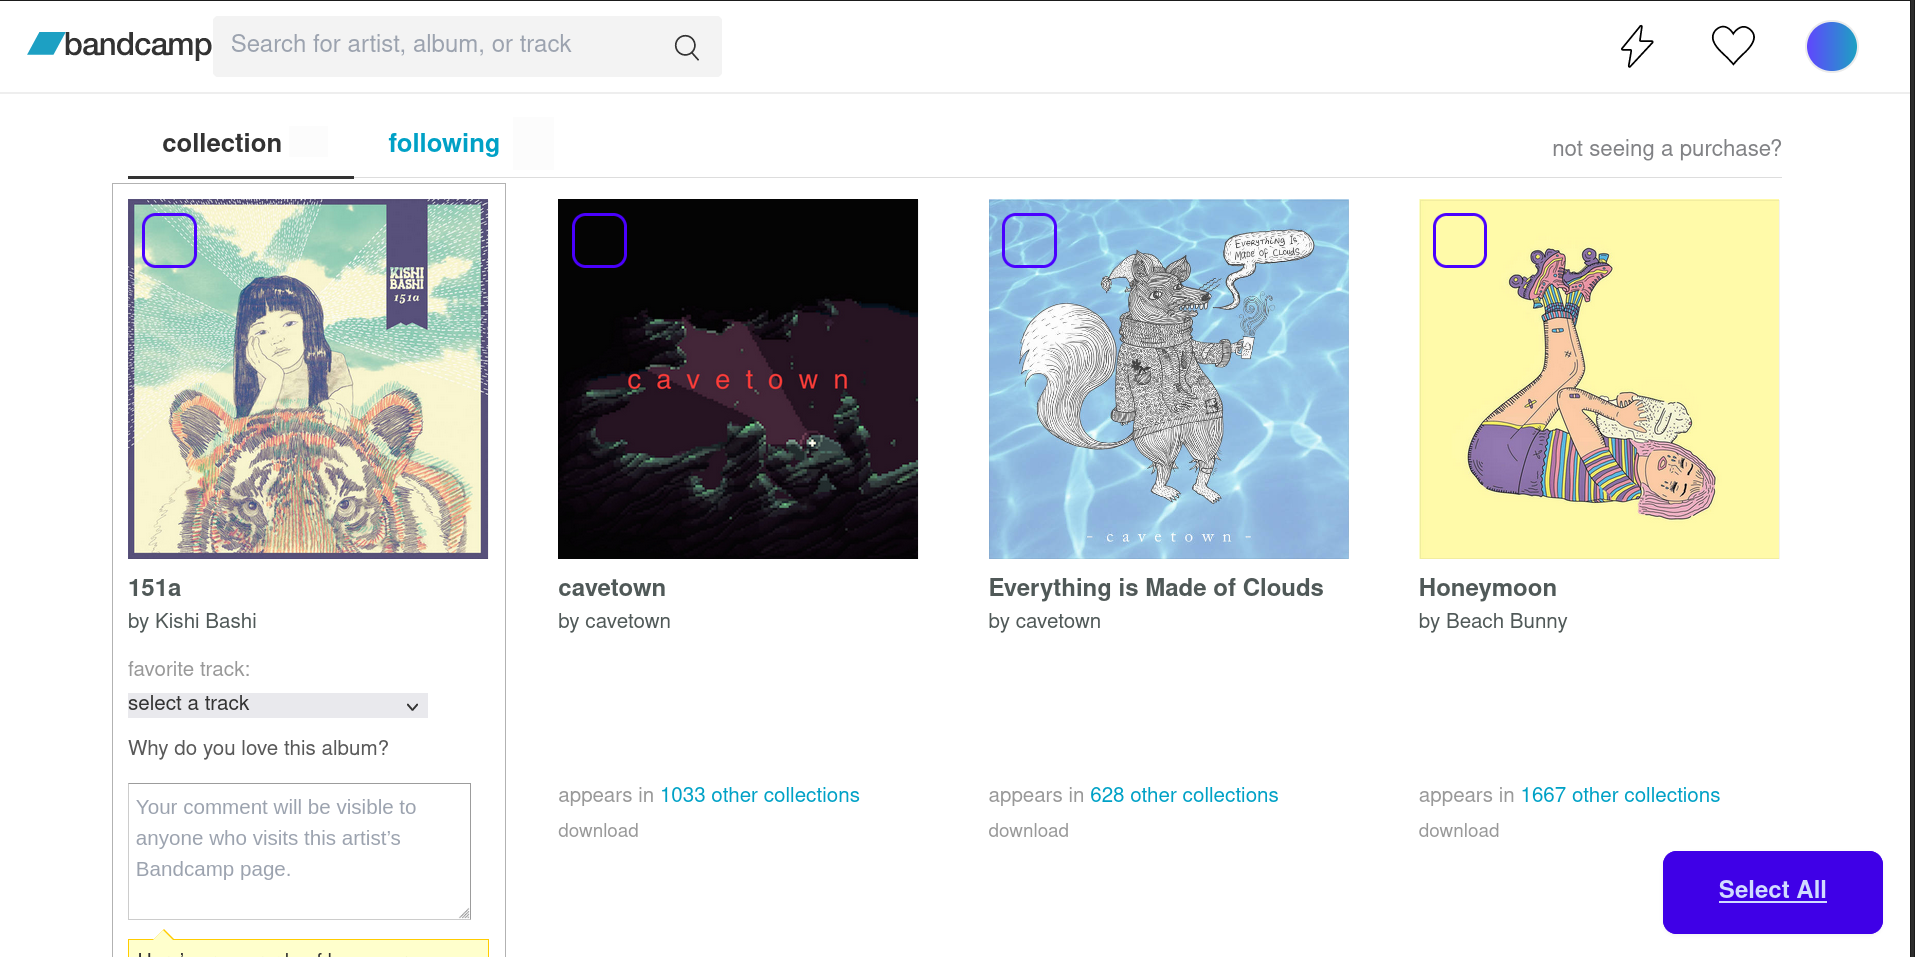 bandcamp collection with batchcamp purple button